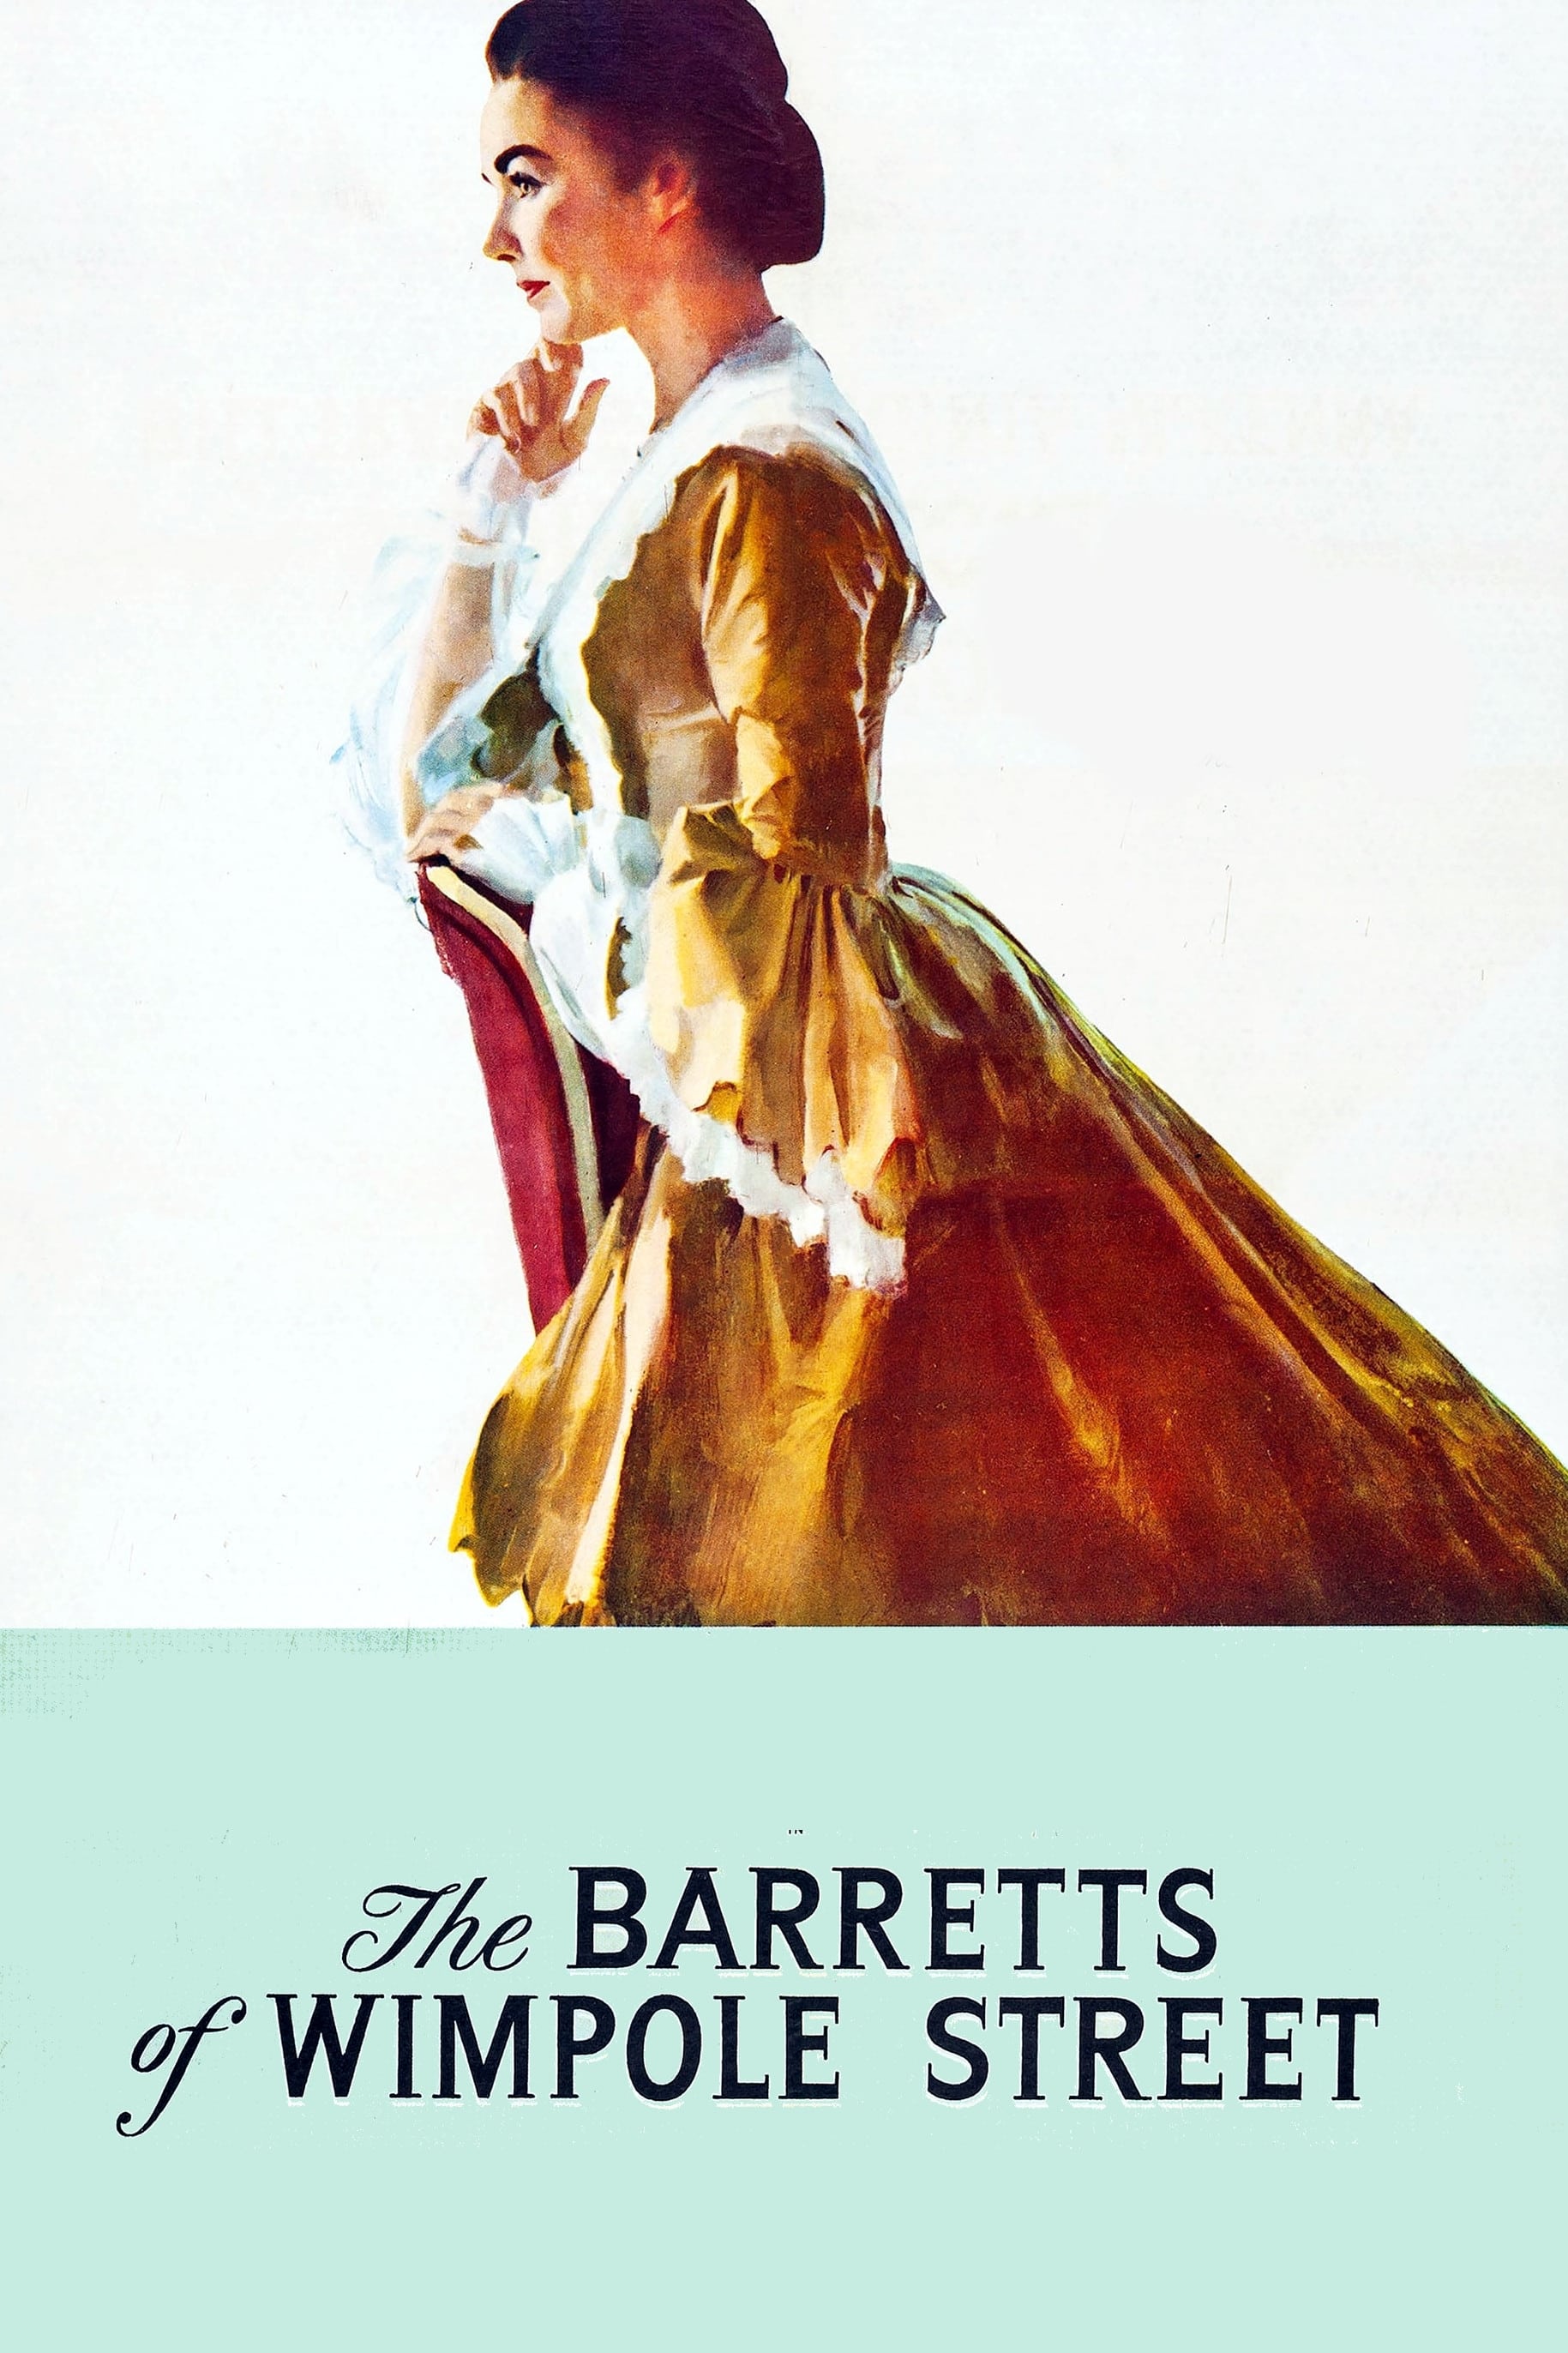 The Barretts of Wimpole Street